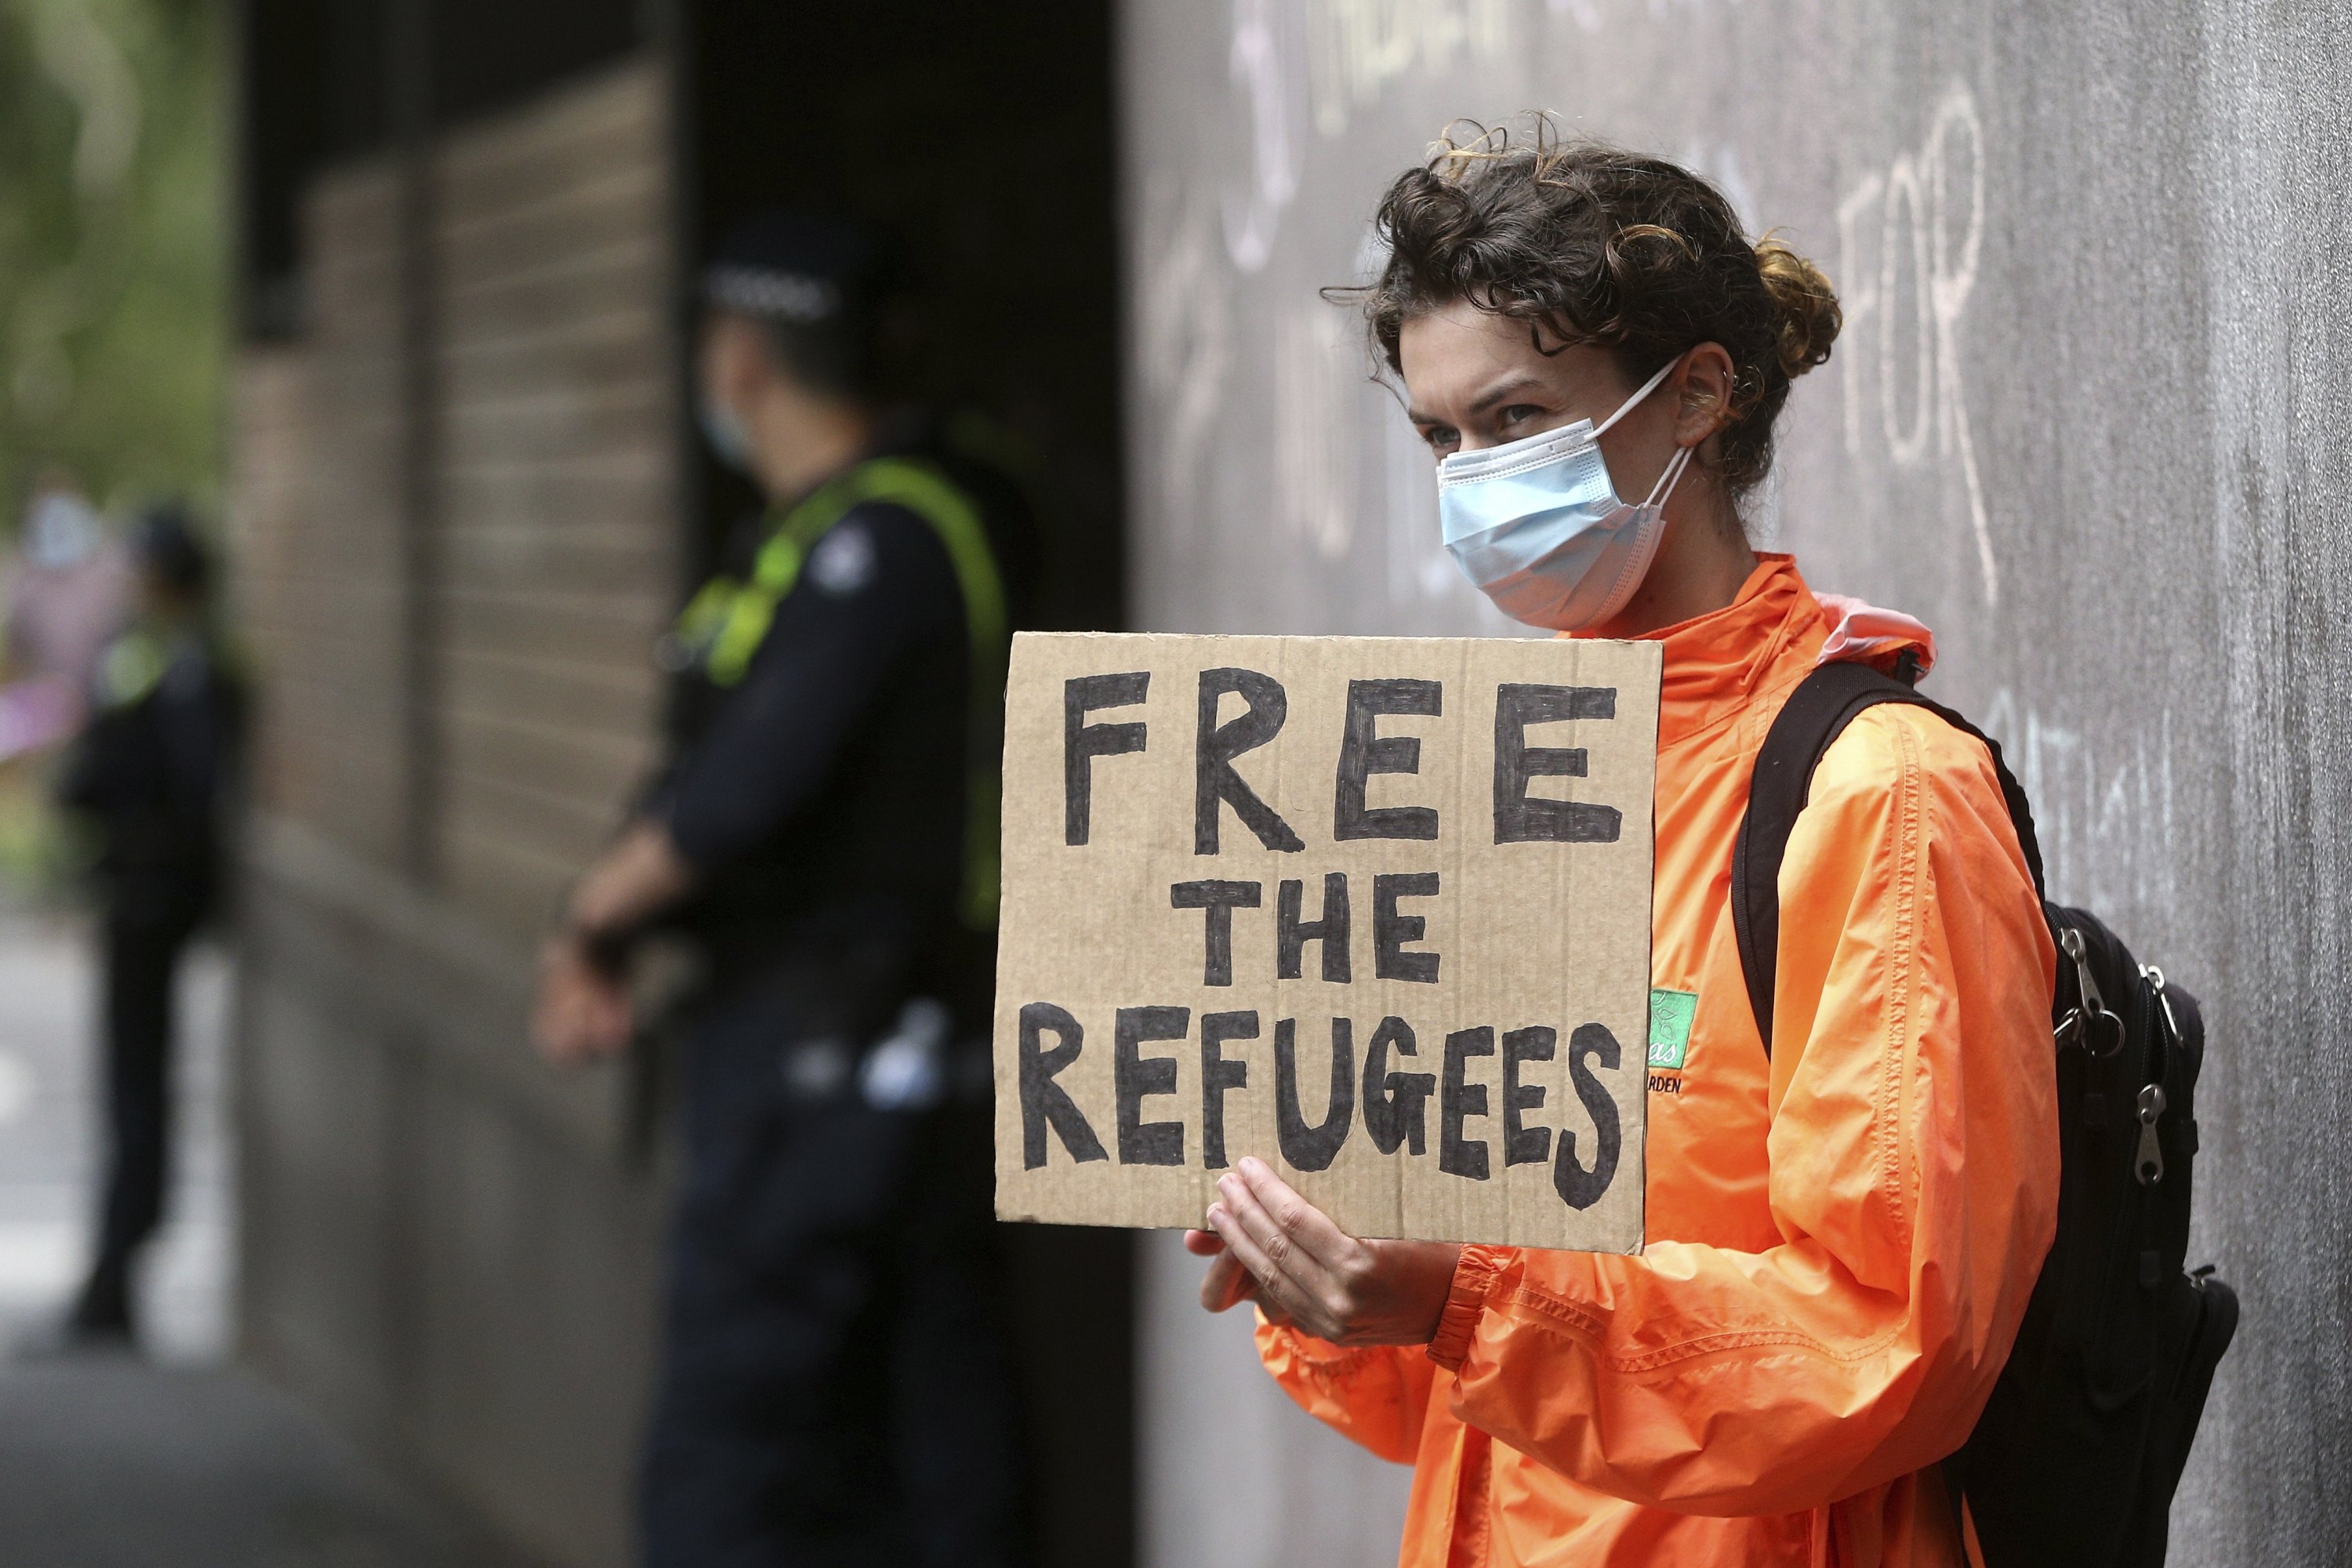 A protester holds a banner outside the Park Hotel calling for the release of refugees being detained inside the hotel in Melbourne, Australia, Jan. 8, 2022. (AP Photo)